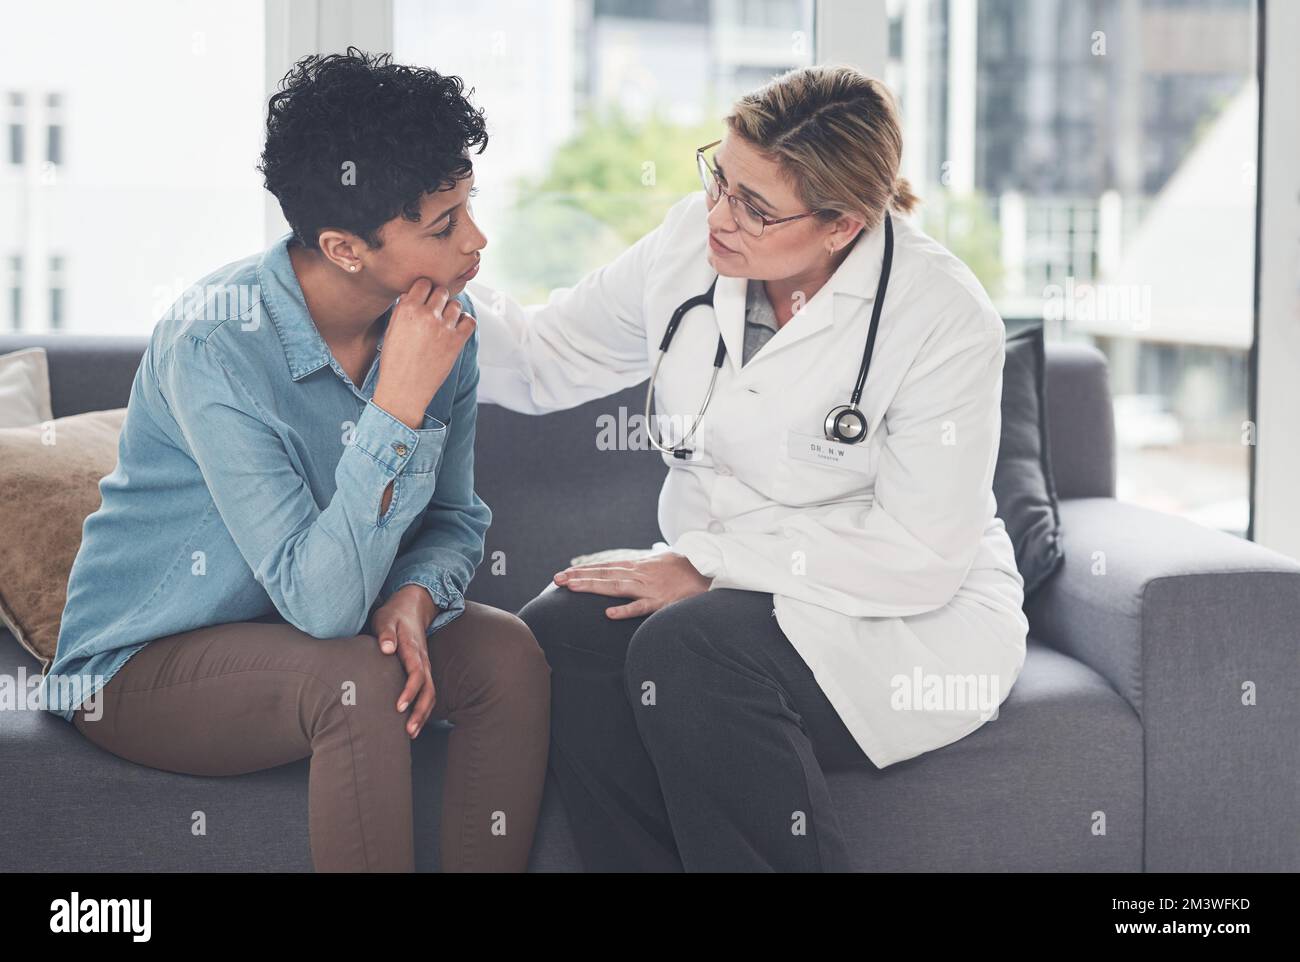 You will overcome this...a compassionate young female doctor consoling a female patient while sitting on the couch in her office. Stock Photo